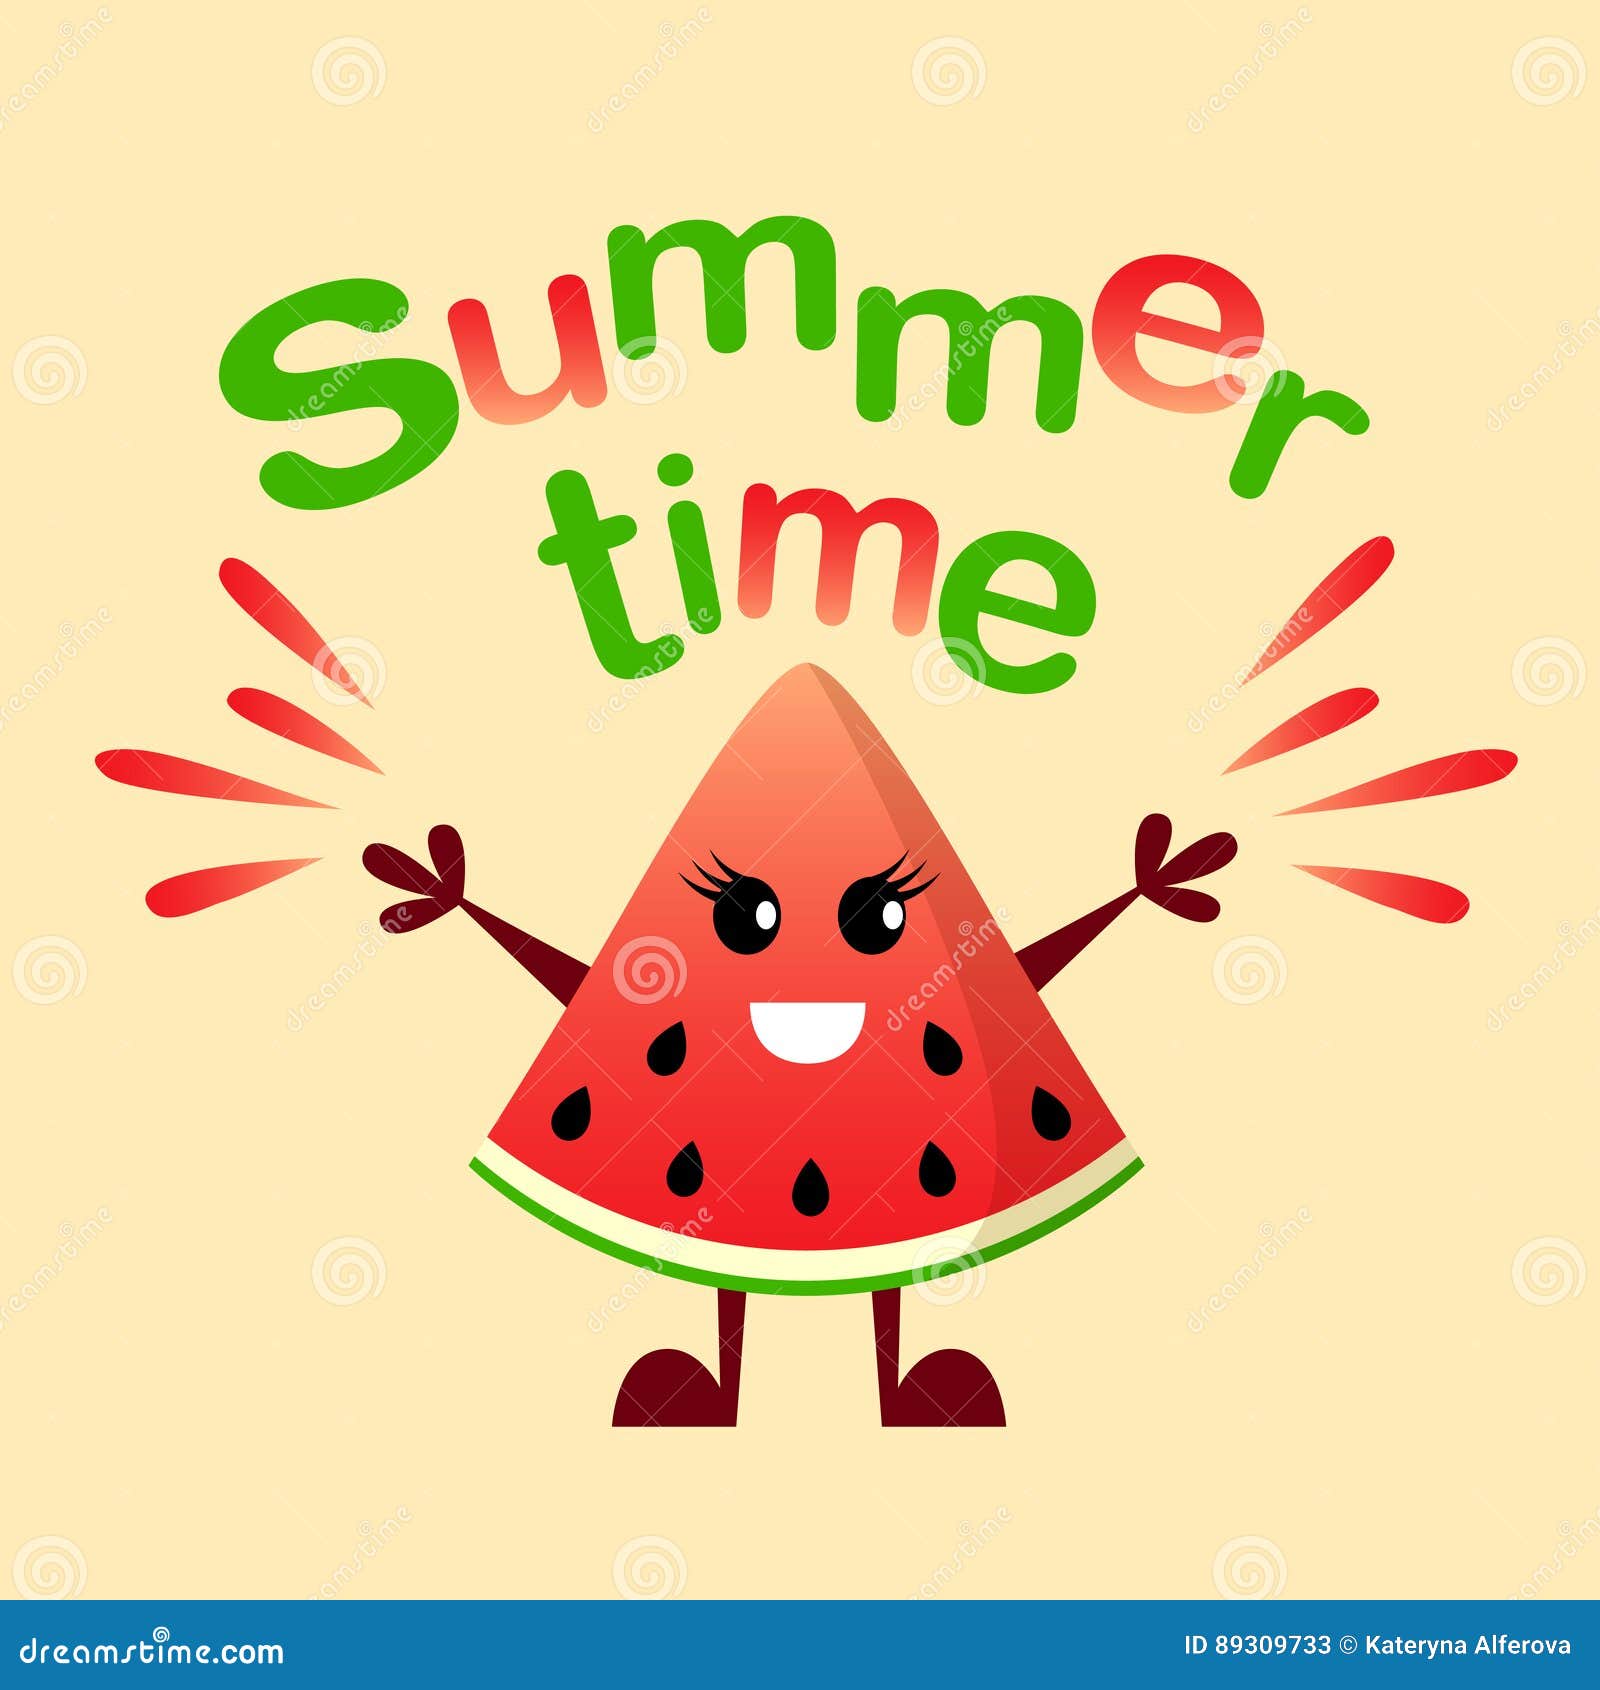 Summer time with cartoon objects Royalty Free Vector Image